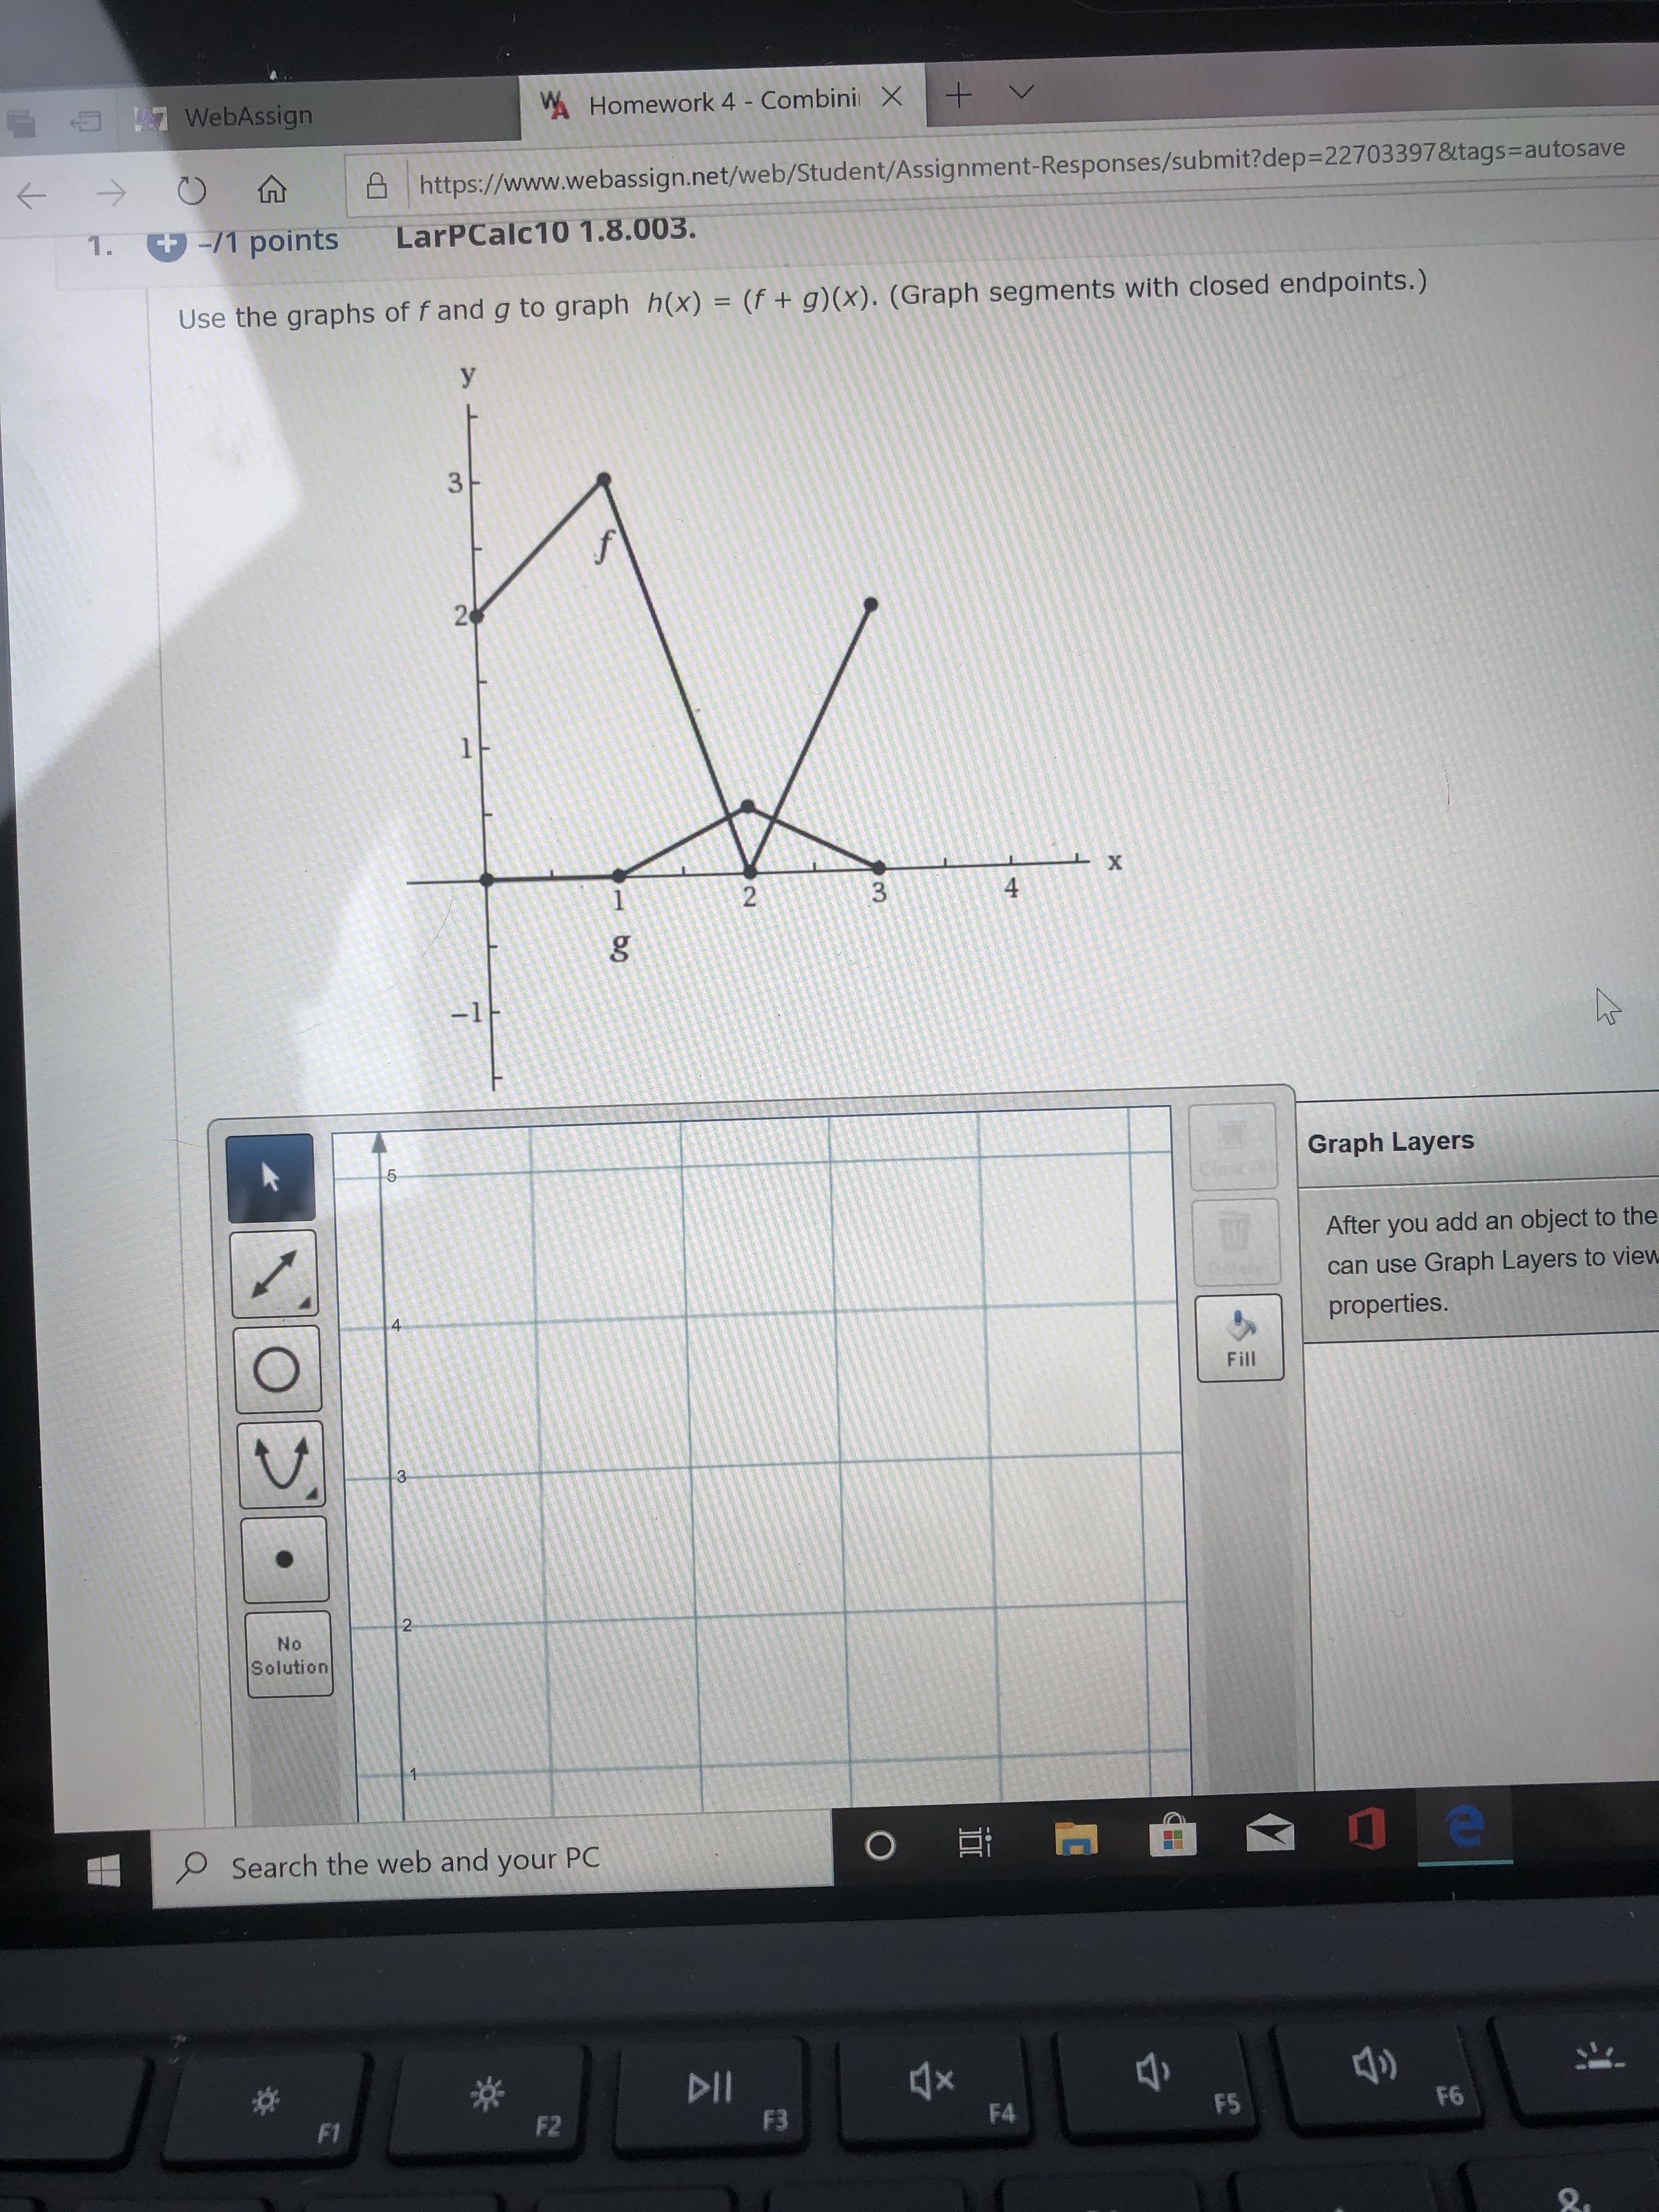 WHomework 4 - Combini X
E a 7 WebAssign
->
https://www.webassign.net/web/Student/Assignment-Responses/submit?dep=22703397&tags3autosave
%3D
1. -/1 points
LarPCalc10 1.8.003.
Use the graphs of f and g to graph h(x) = (f + g)(x). (Graph segments with closed endpoints.)
У
1F
3.
-1
Graph Layers
After you add an object to the
can use Graph Layers to view
4
properties.
Fill
3-
No
Solution
P Search the web and your PC
F6
F5
F2
F4
F3
F1
21
2.
3.
2.
LO
